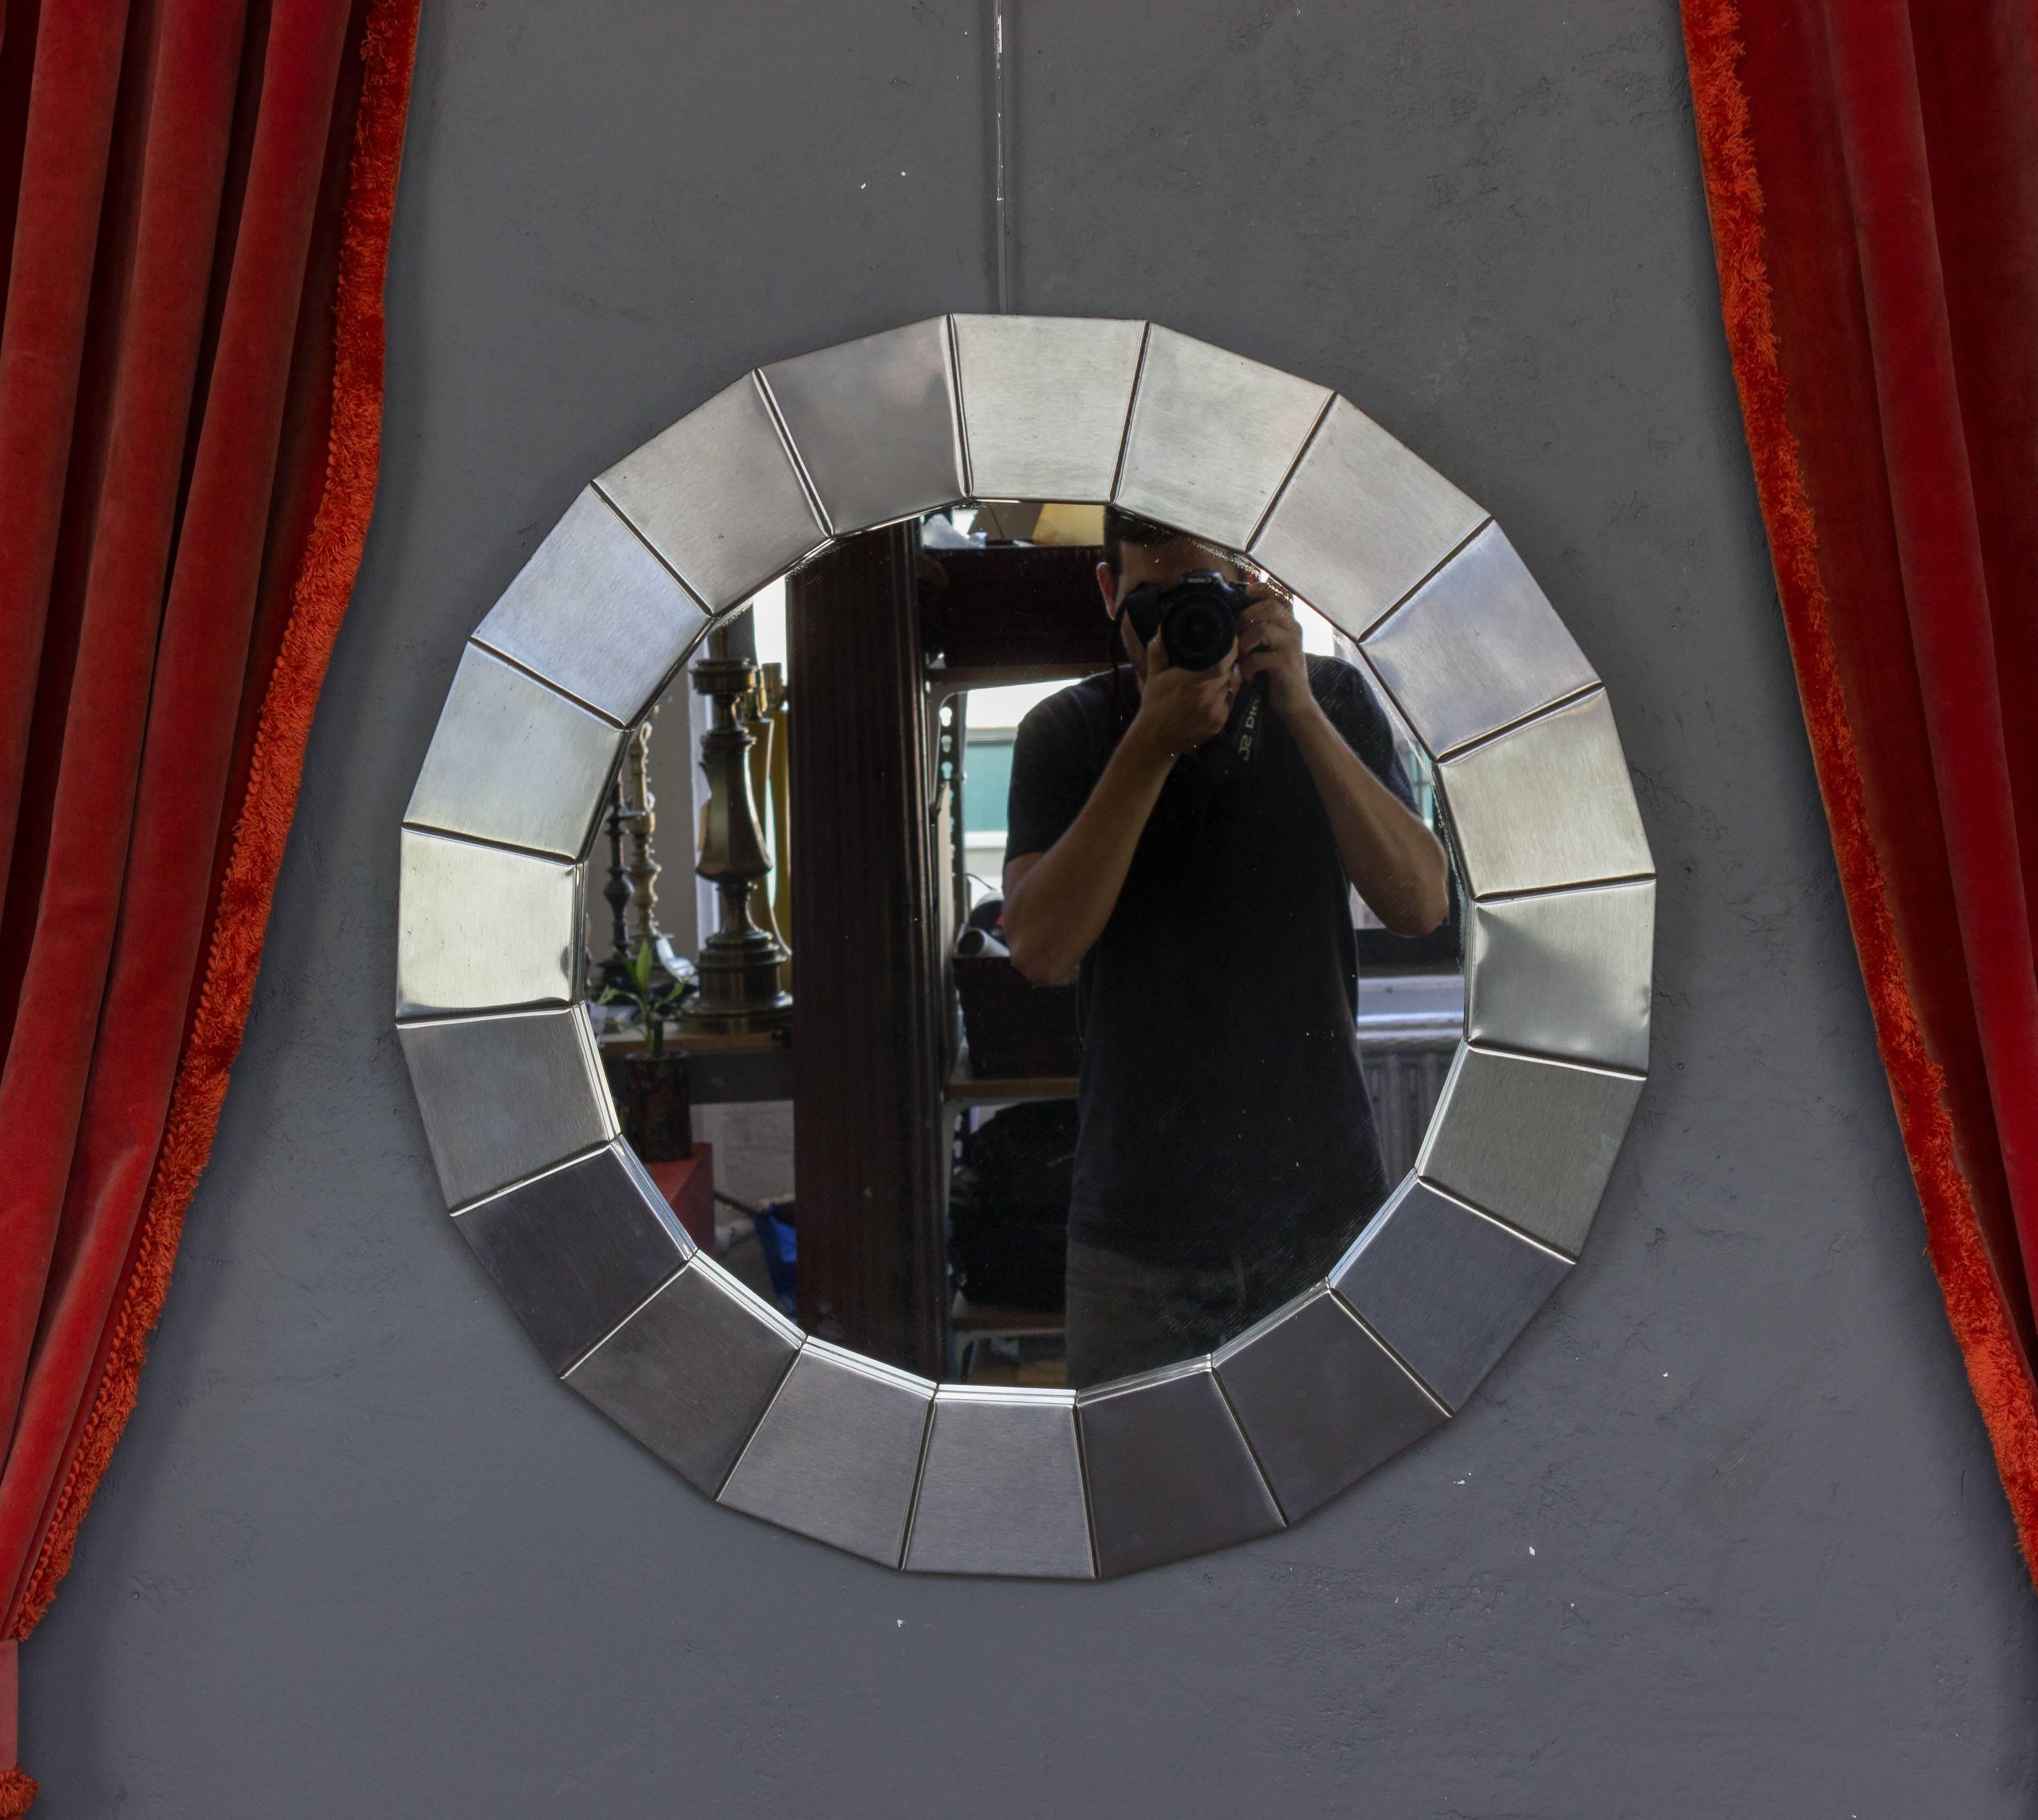 1970s pair of round polished steel framed mirrors. Willing to split the pair, if a single mirror is wanted. Great condition with small, light scratching on one of the mirrors.

Ref #: DM1213-03

Dimensions: 27.5